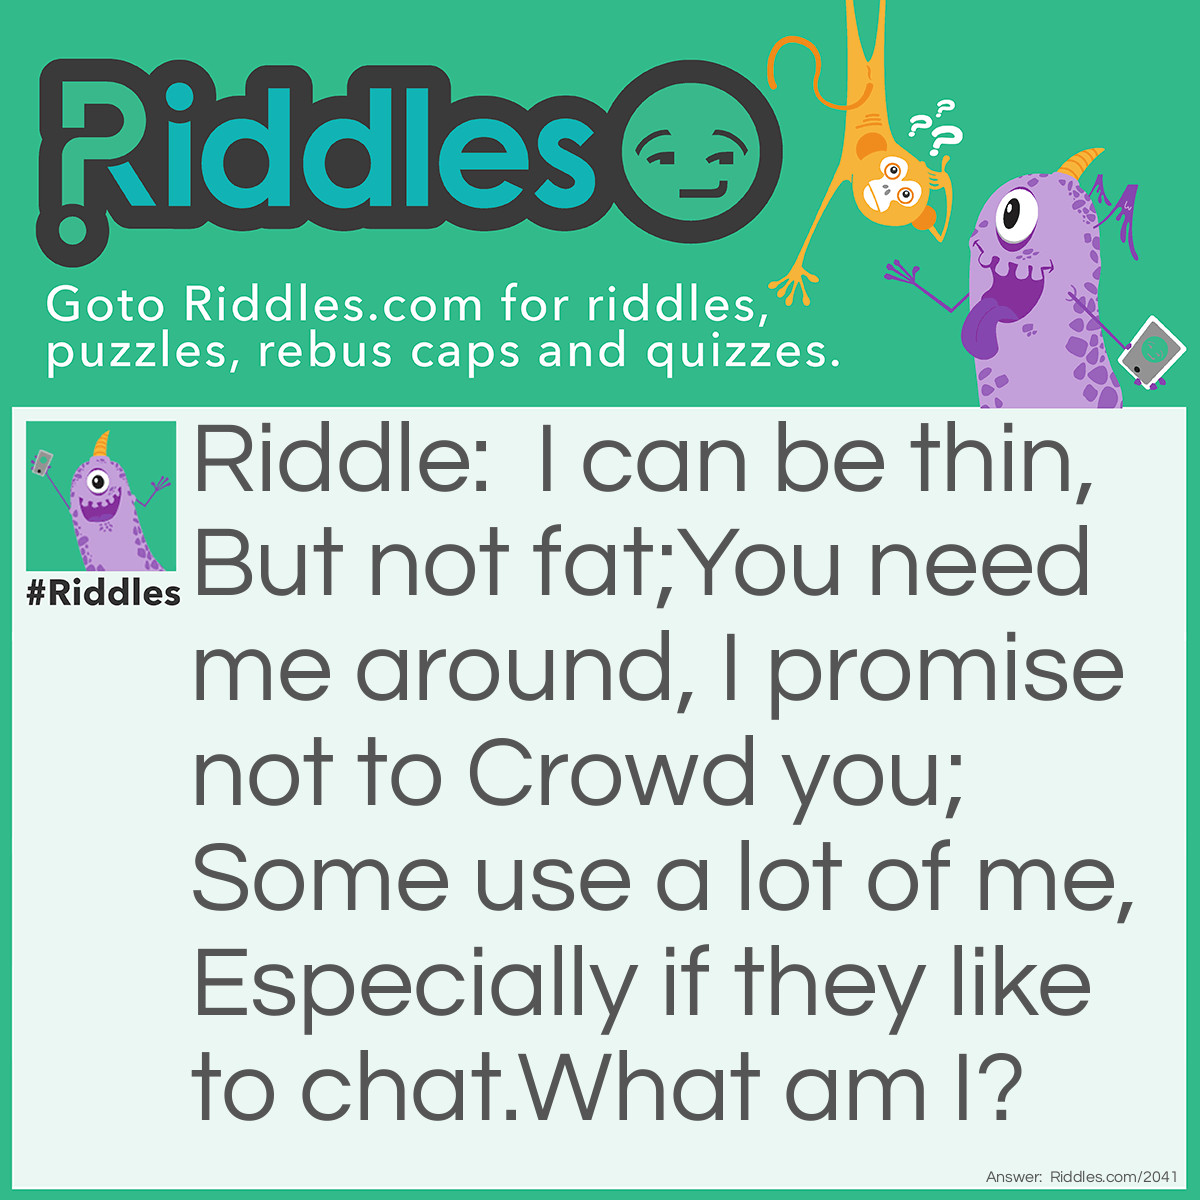 Riddle: I can be thin, but not fat;
You need me around, I promise not to crowd you;
Some use a lot of me, especially if they like to chat.
What am I? Answer: Air.